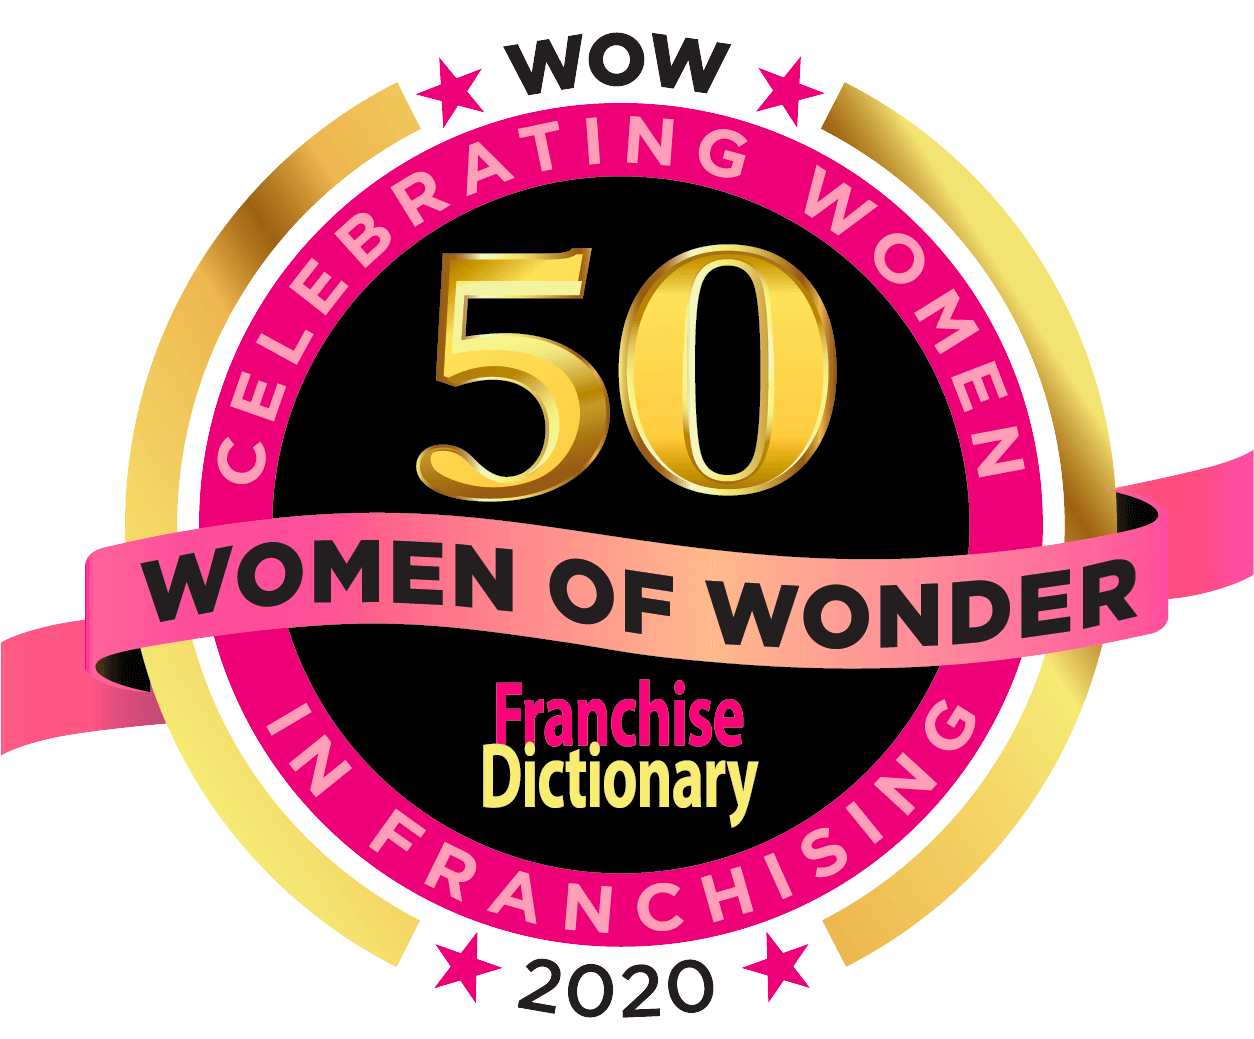 Woofie's co-founders named two of the top 50 women of wonder (WOW) by franchise dictionary magazine